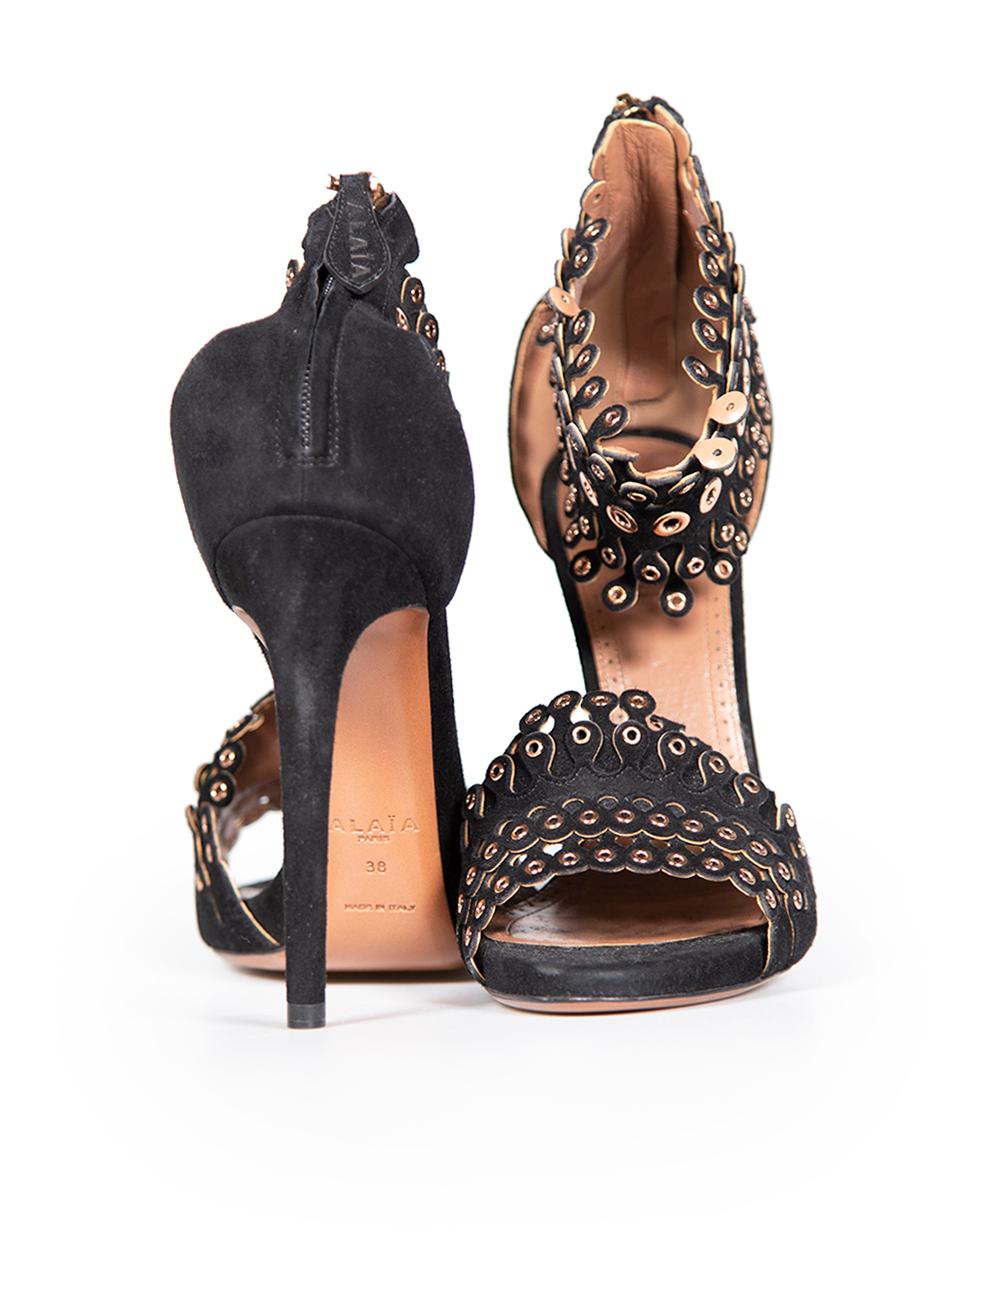 Alaïa Black Suede Laser-Cut Eyelet Detail Sandals Size IT 38 In Good Condition For Sale In London, GB